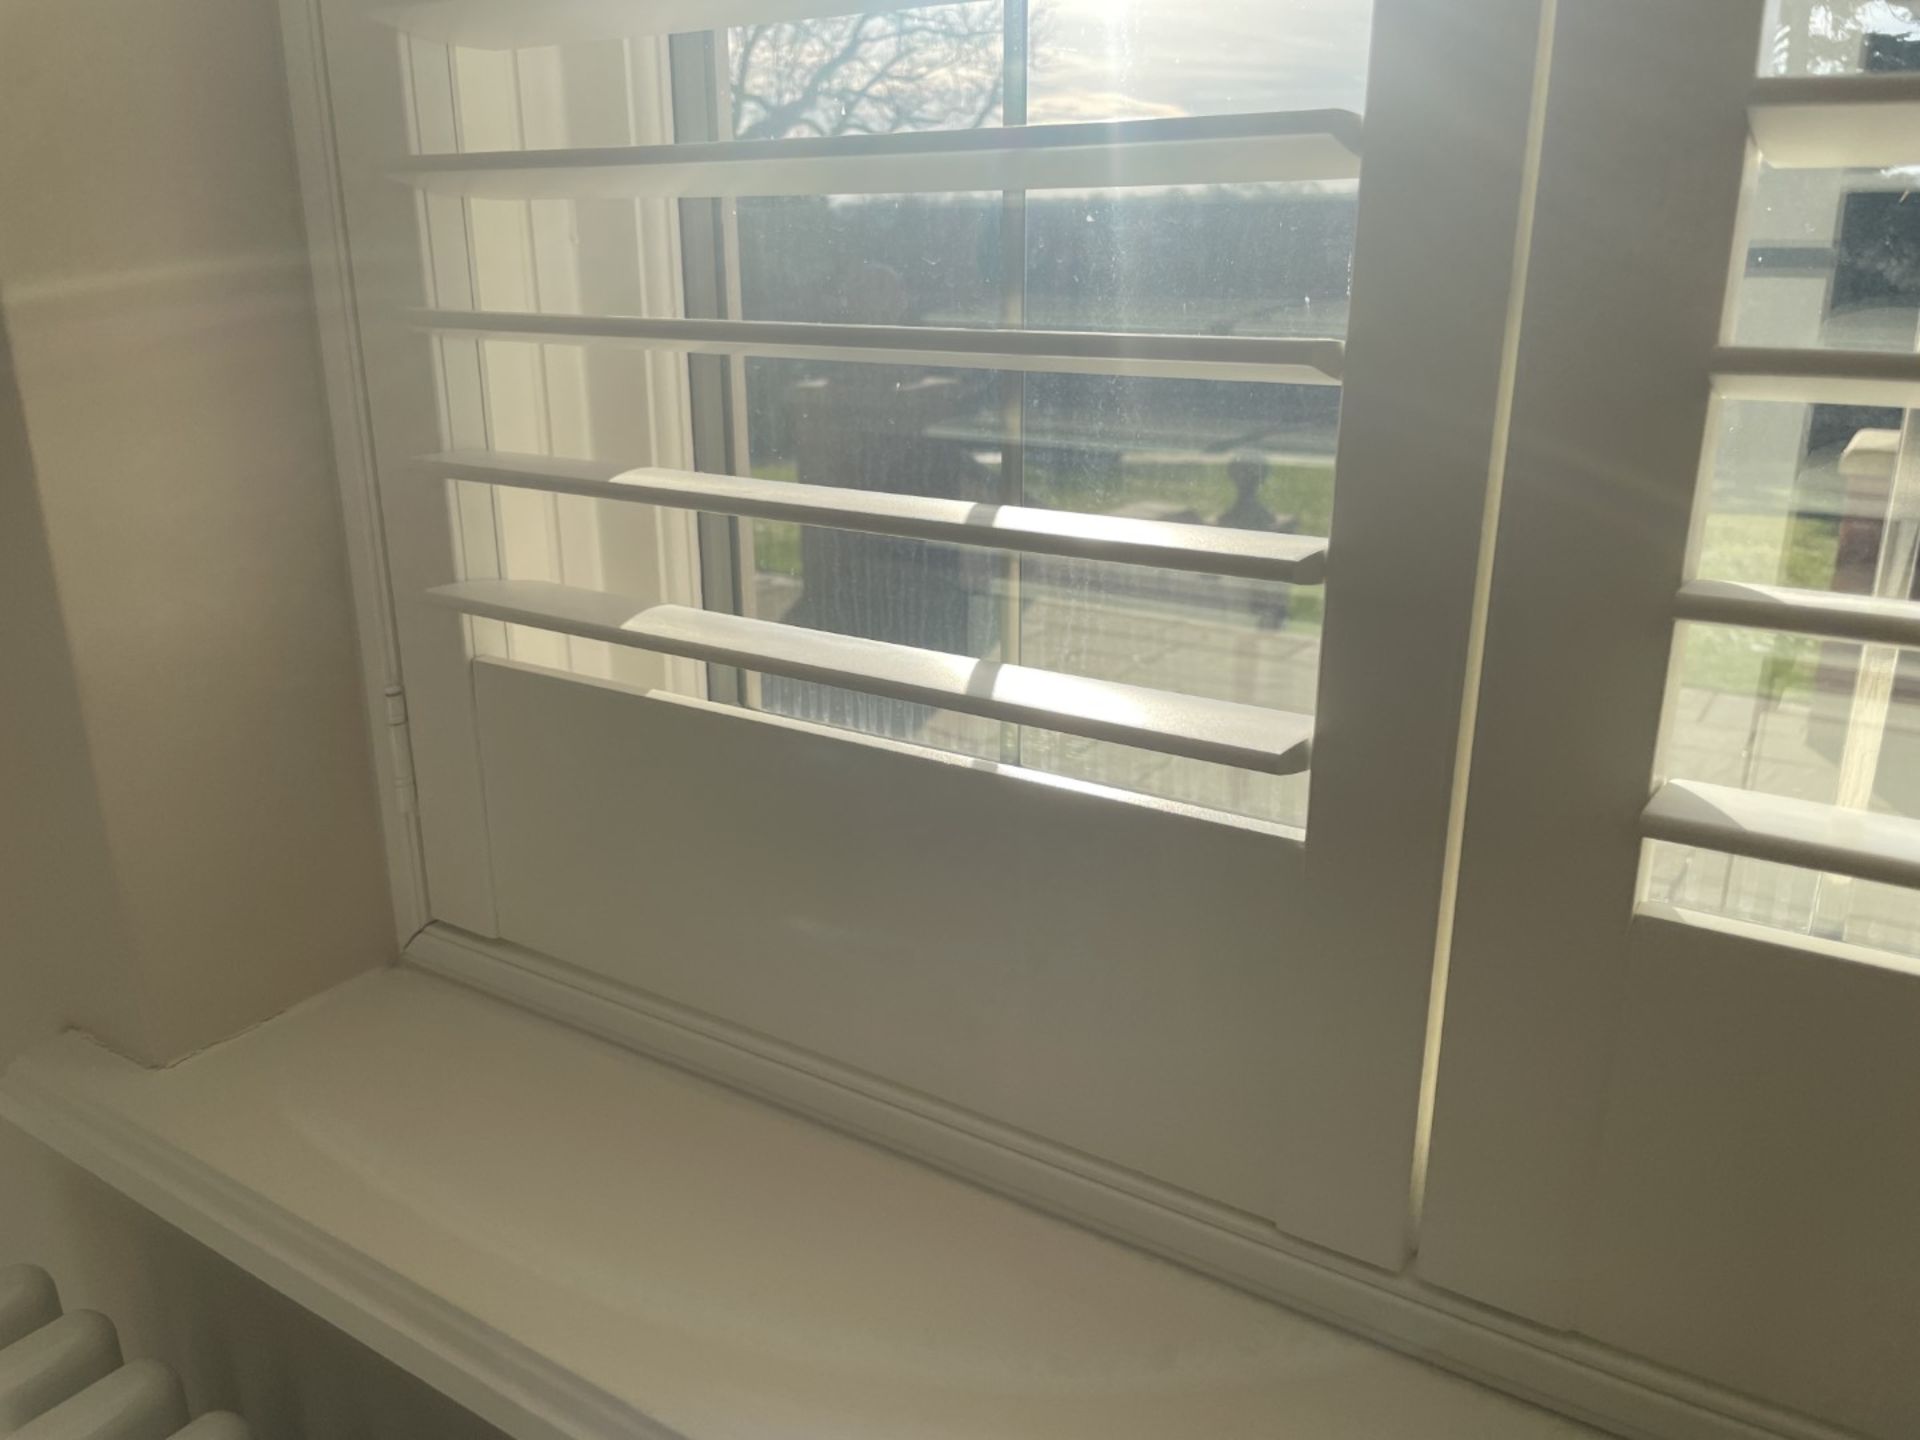 1 x Hardwood Timber Double Glazed Window Frames fitted with Shutter Blinds, In White - Ref: PAN108 - Image 10 of 19